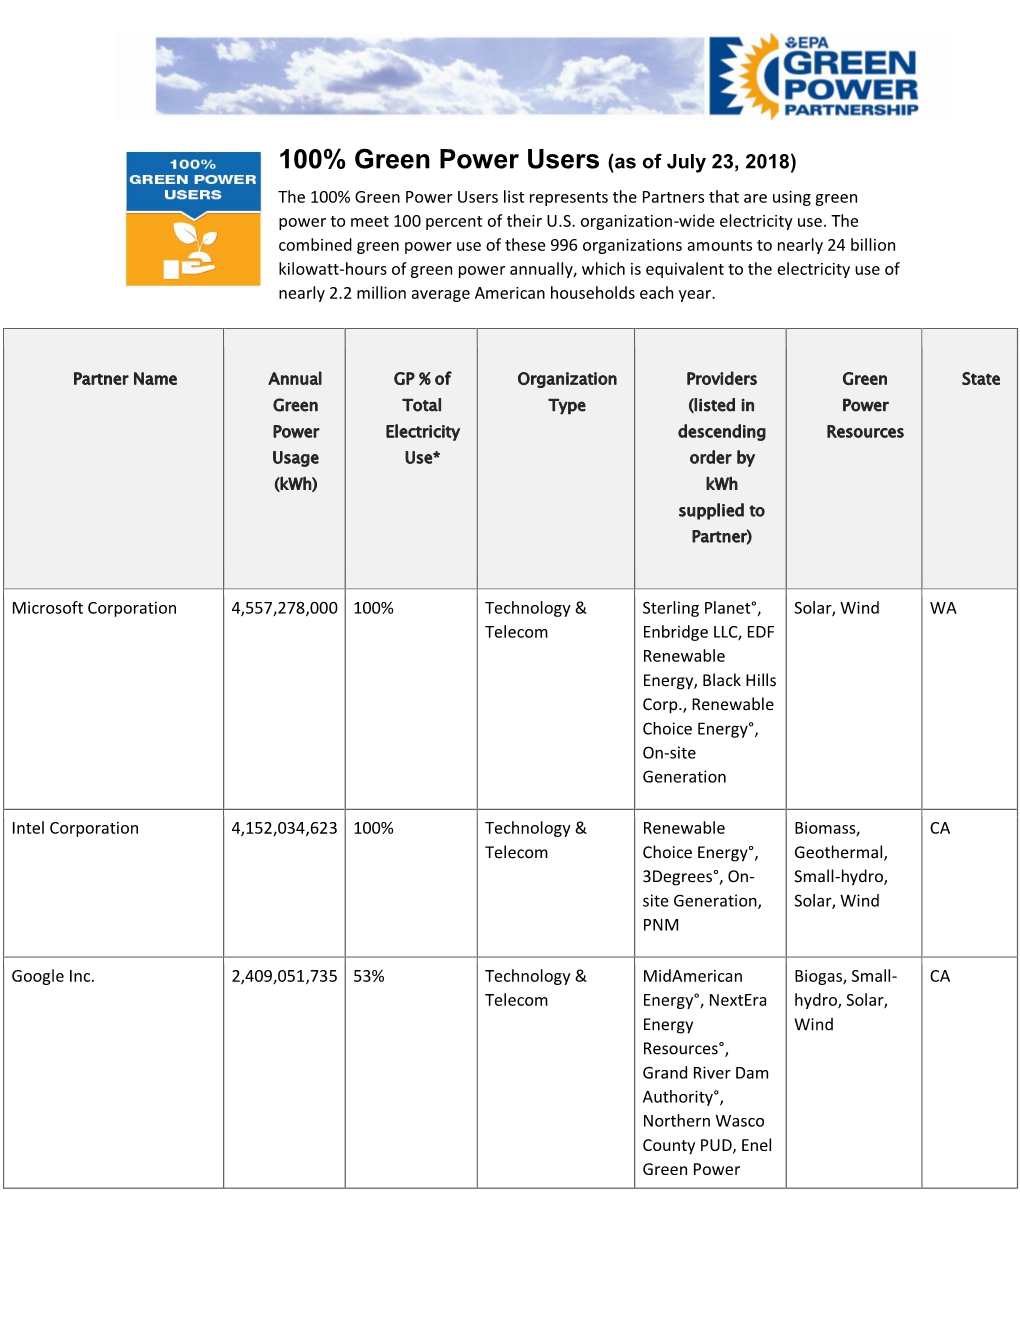 As of July 23, 2018) the 100% Green Power Users List Represents the Partners That Are Using Green Power to Meet 100 Percent of Their U.S